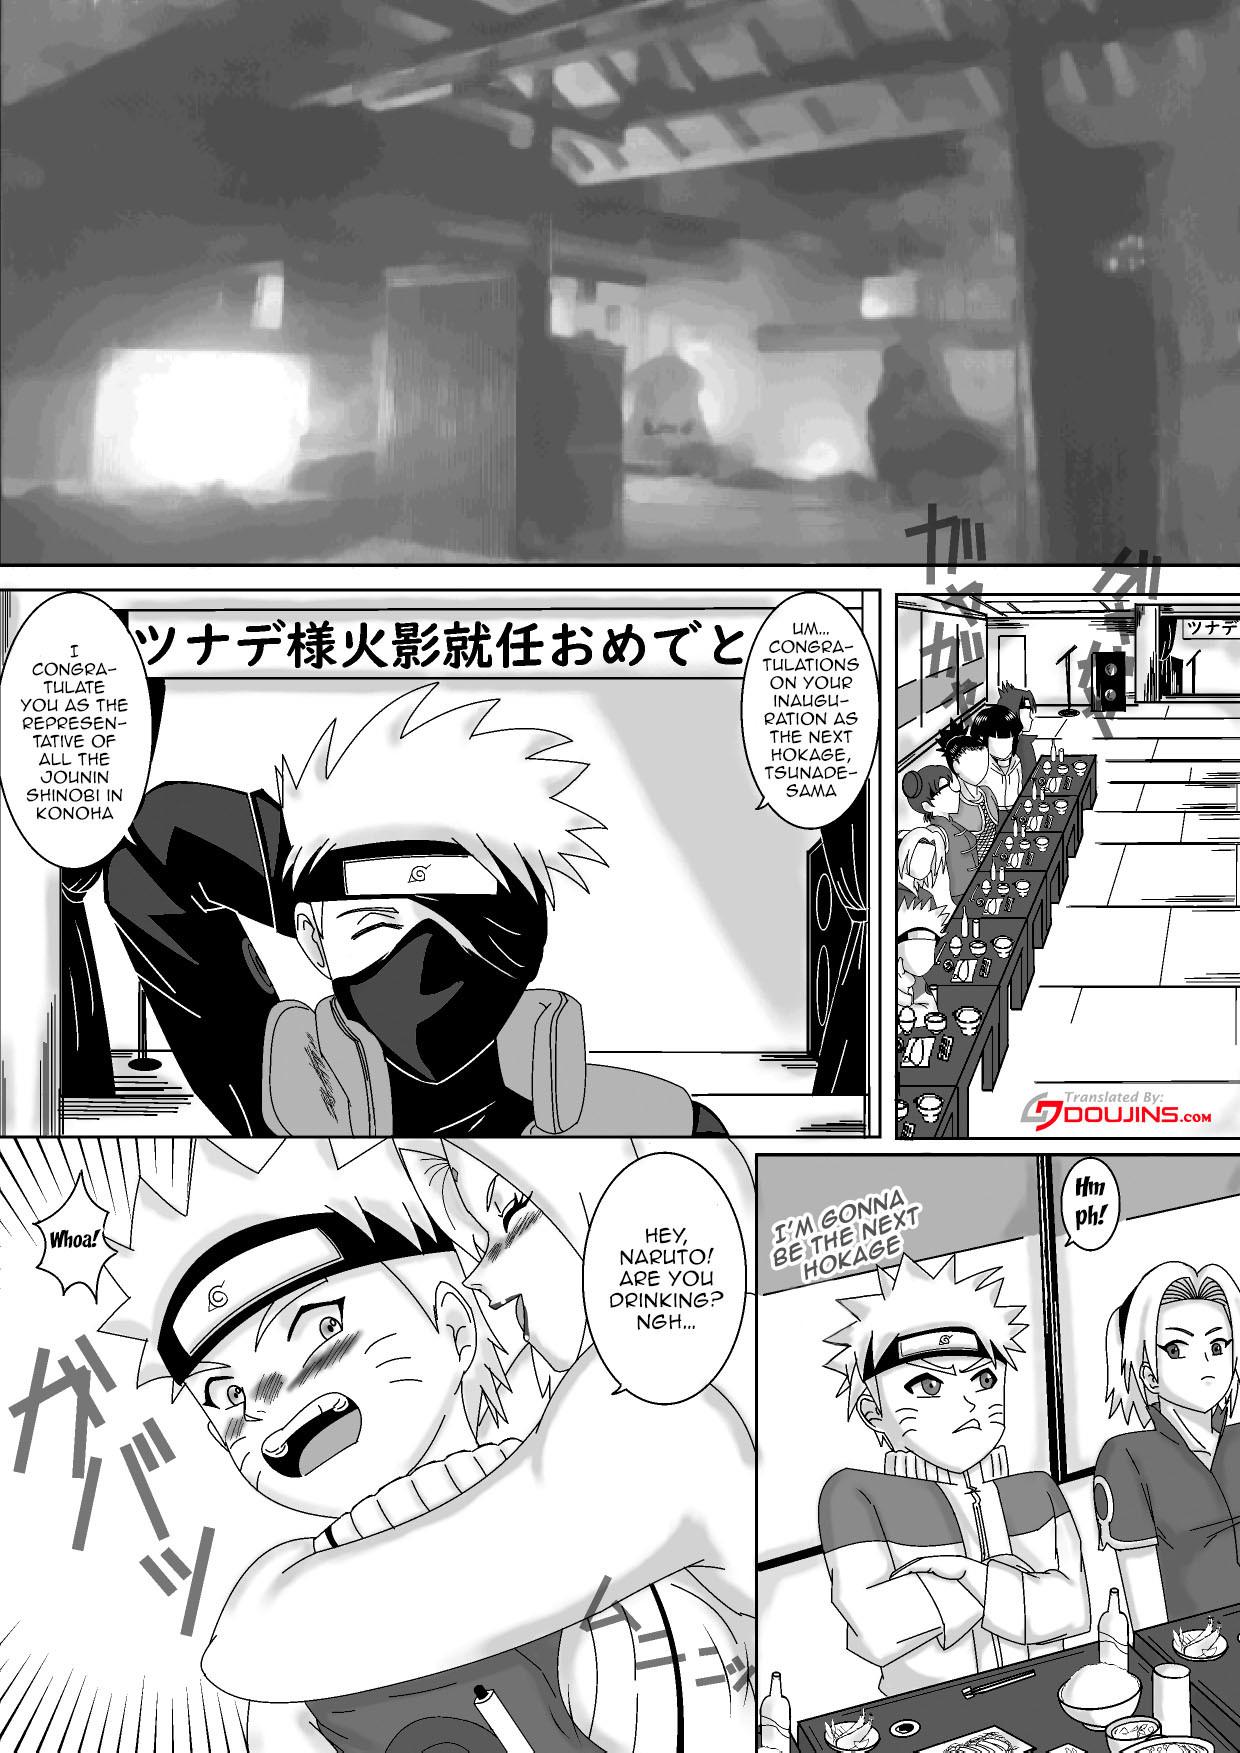 Oral Sex Nomisugite Deisui Shita BBA to Yarimakutta Ken!! | The Case Of Having Sex With This Old Lady After She Got Herself Really Drunk - Naruto Kissing - Page 2